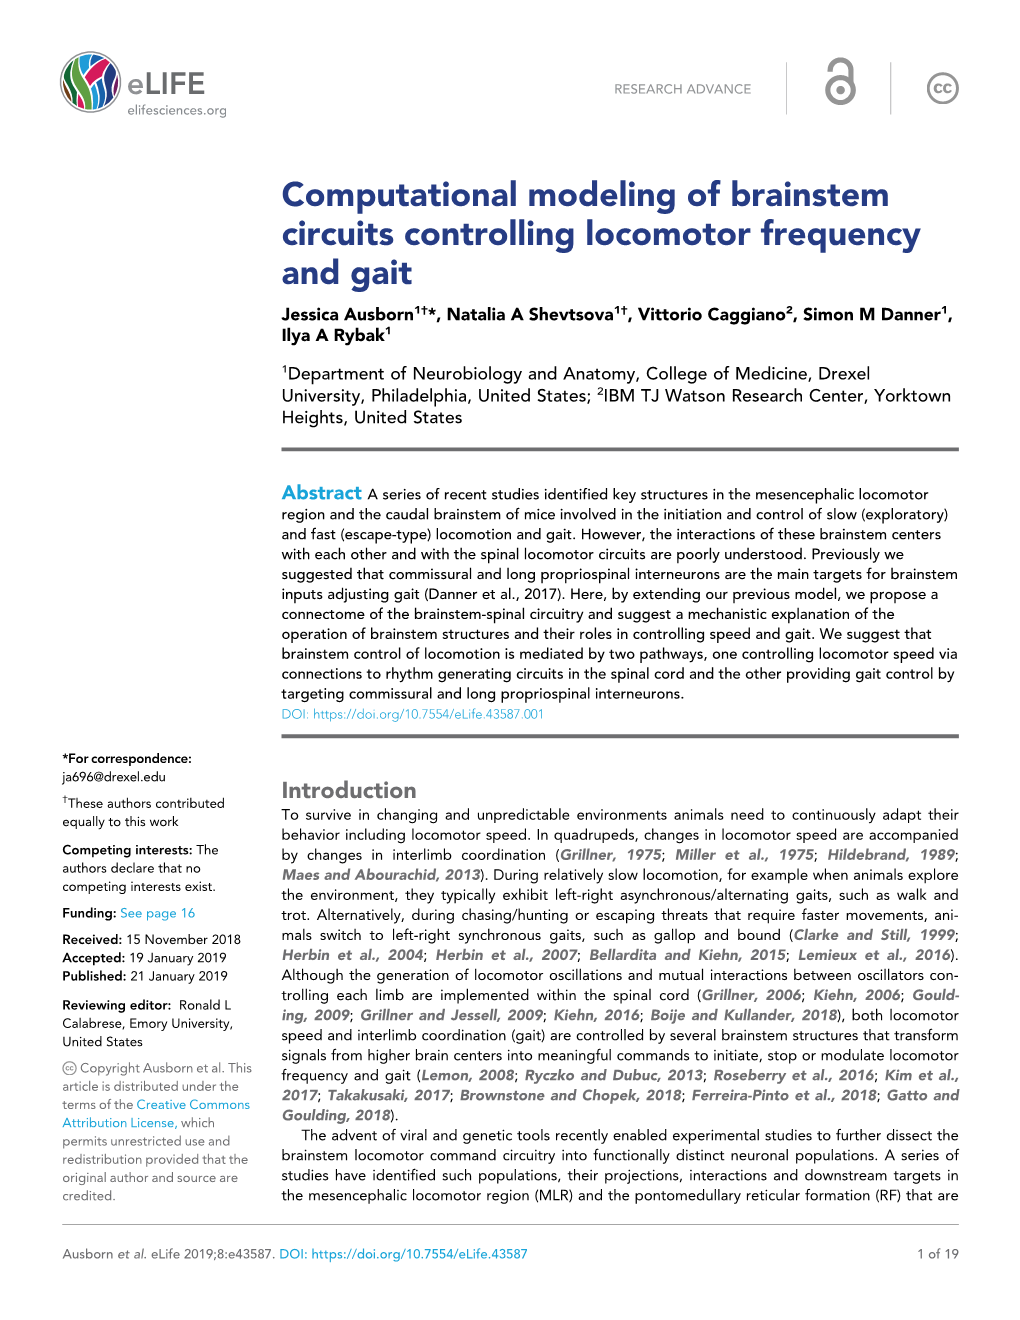 Computational Modeling of Brainstem Circuits Controlling Locomotor Frequency and Gait